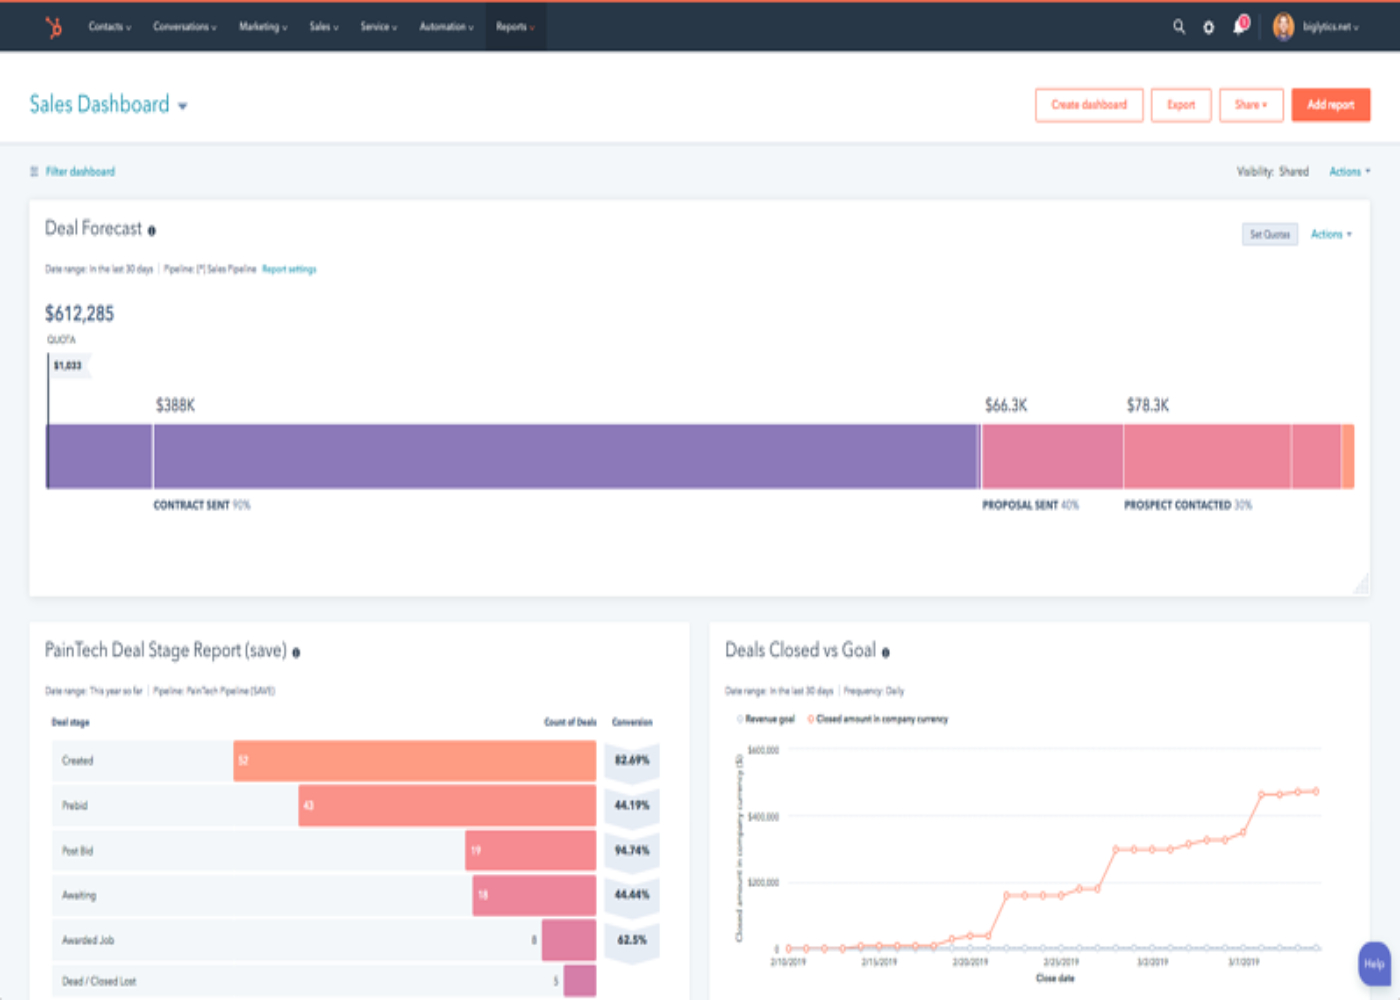 Sample view of the HubSpot sales dashboard.